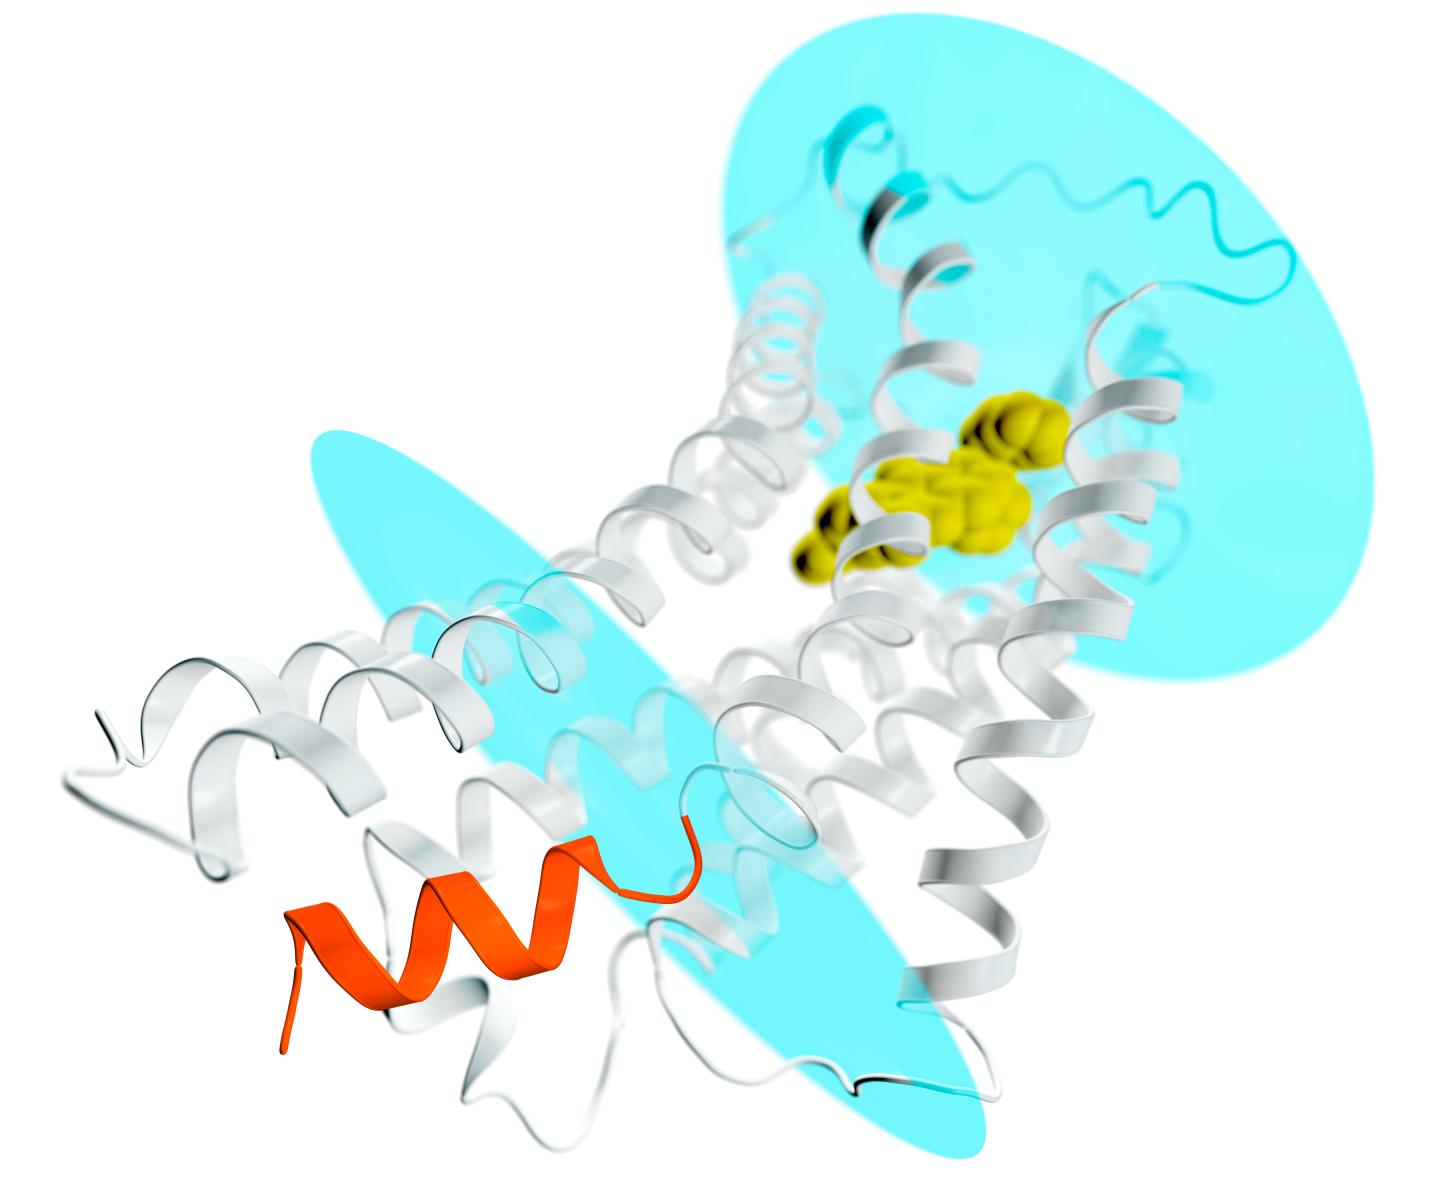 Depiction of the AT2 Receptor